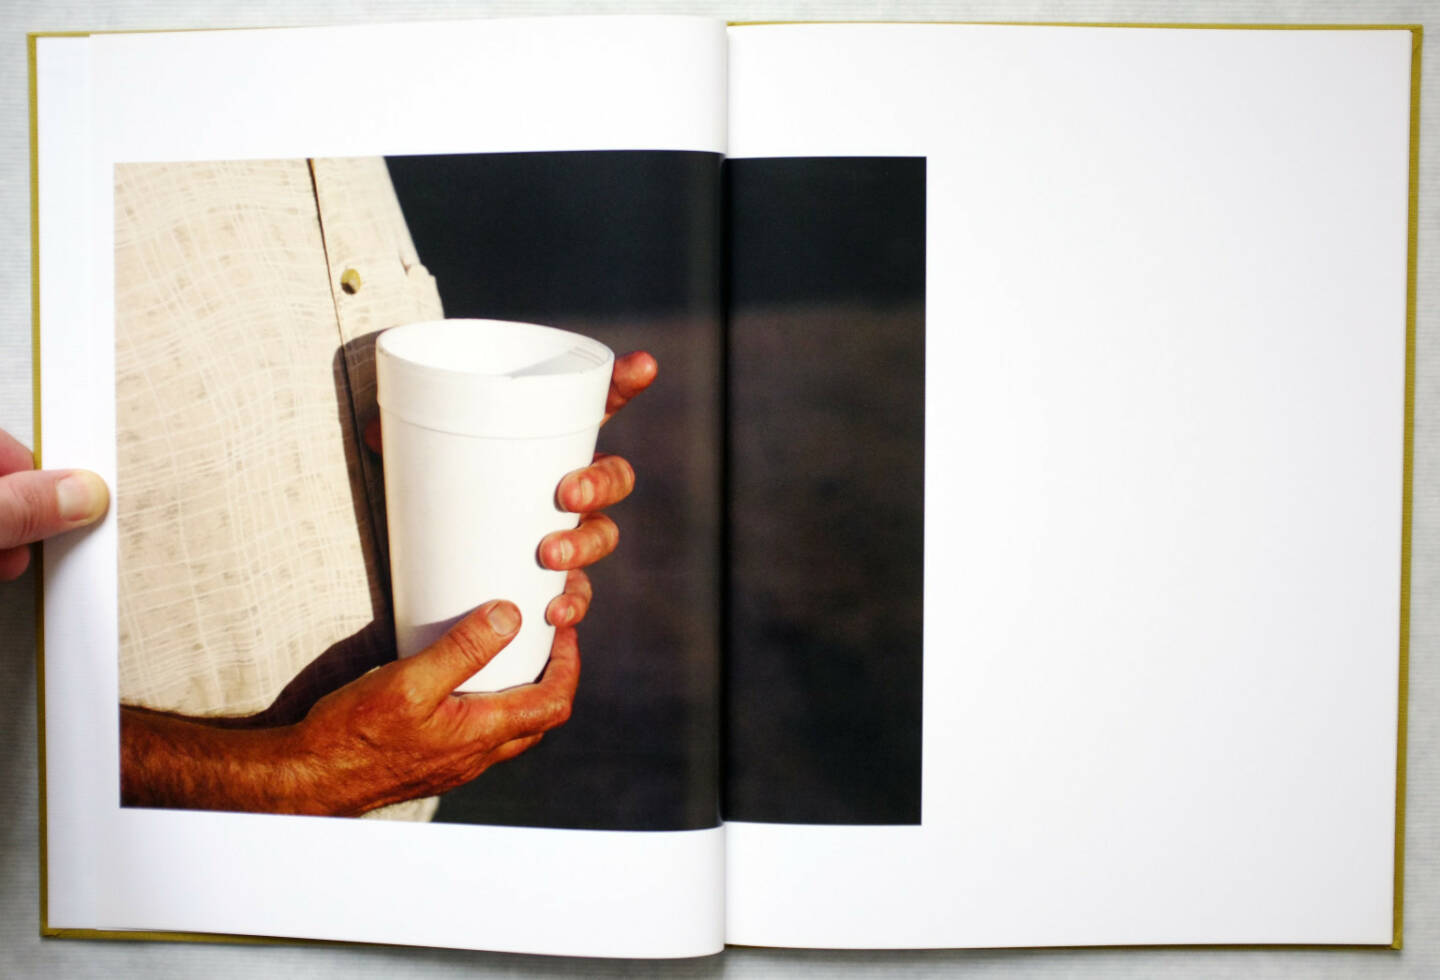 Paul Graham - a shimmer of possibility, 800-1200 Euro, http://josefchladek.com/book/paul_graham_-_a_shimmer_of_possibility